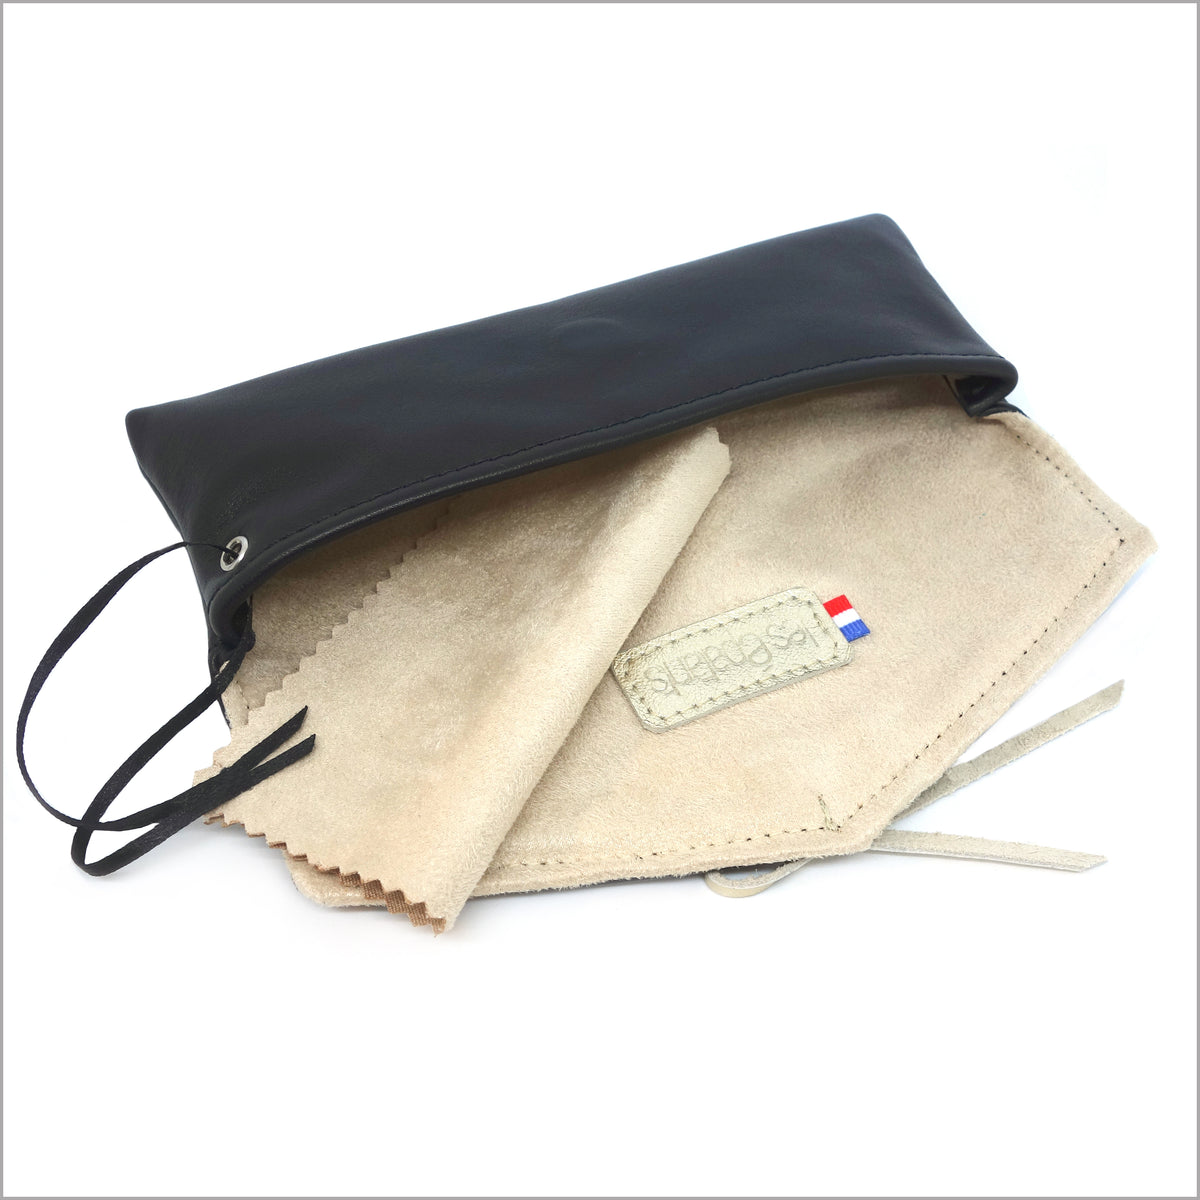 Women's glasses case in soft black leather